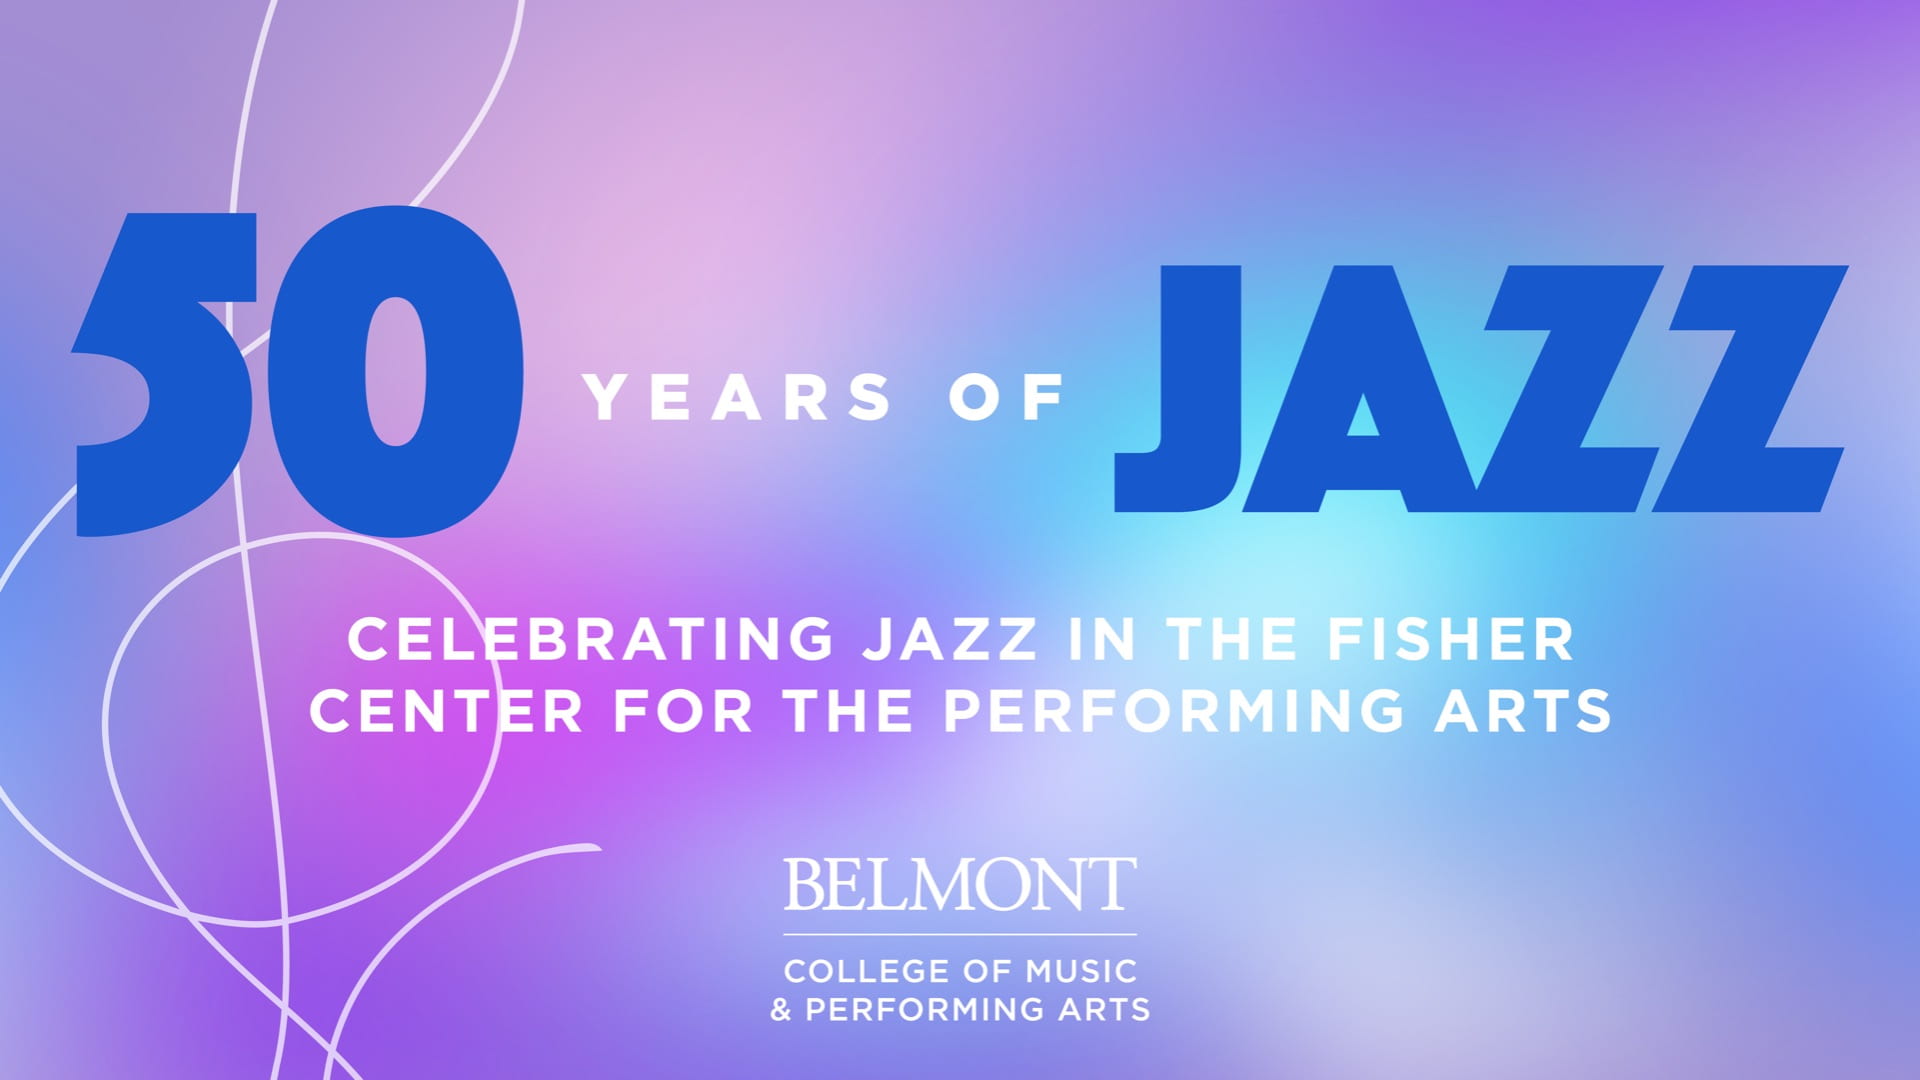 50 Years of Jazz, Celebrating Jazz in the Fisher Center for the Performing Arts